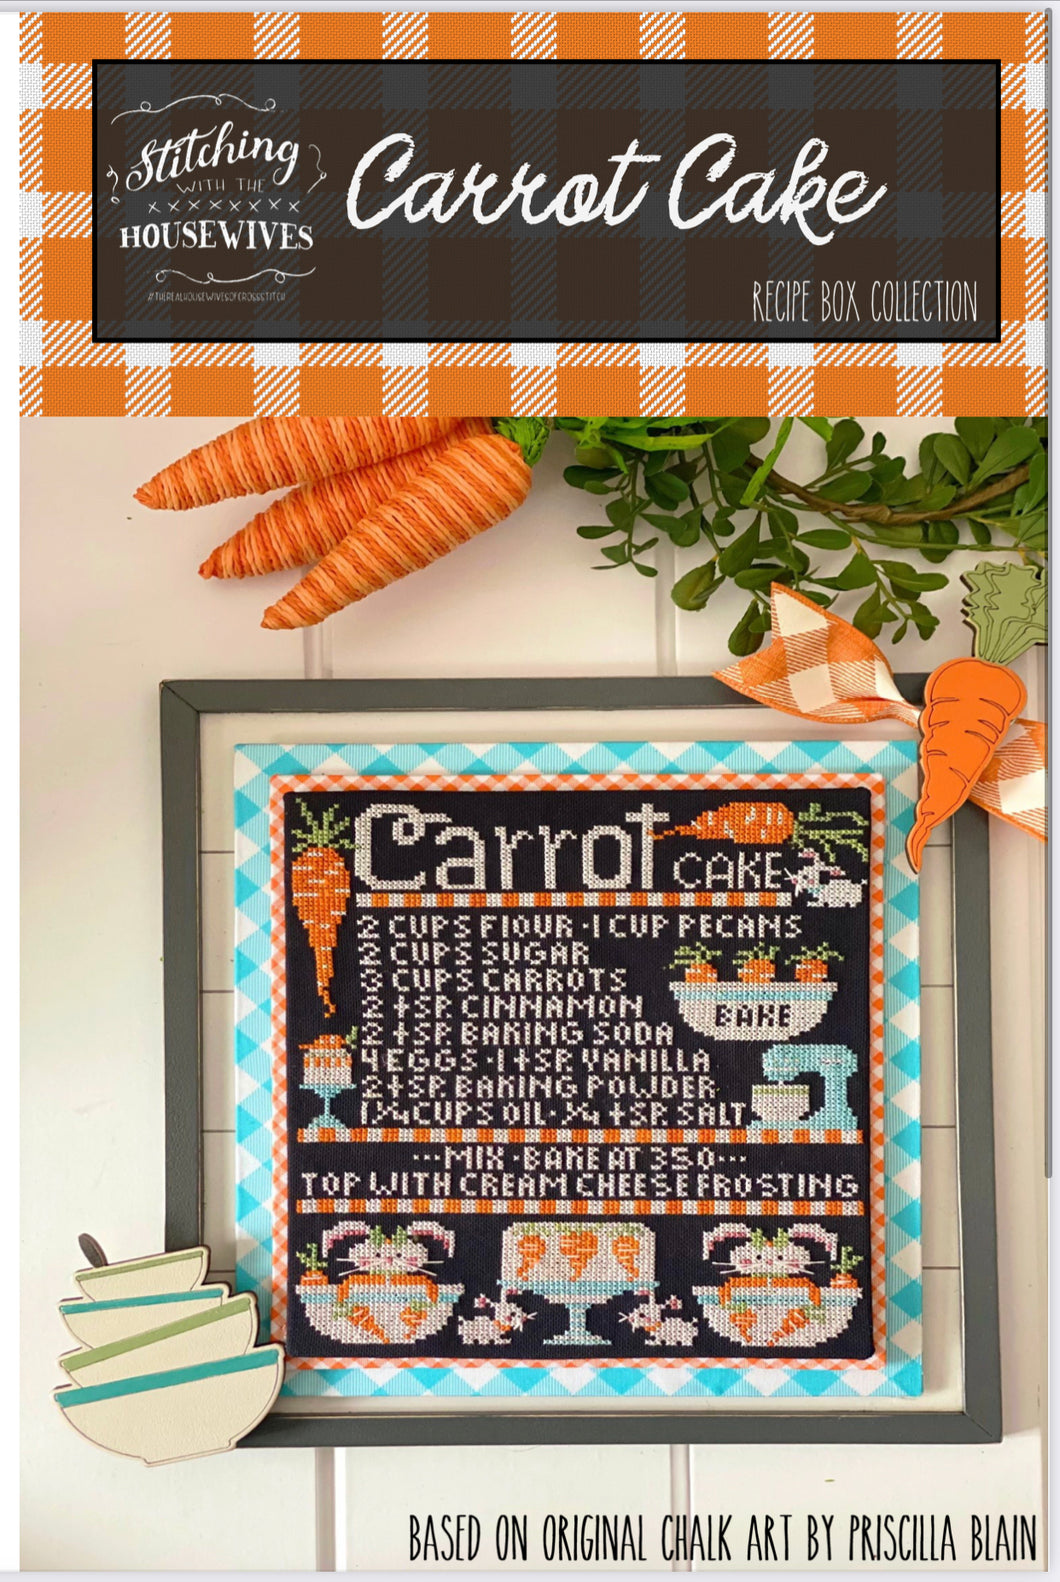 Carrot Cake by Stitching with the Housewives